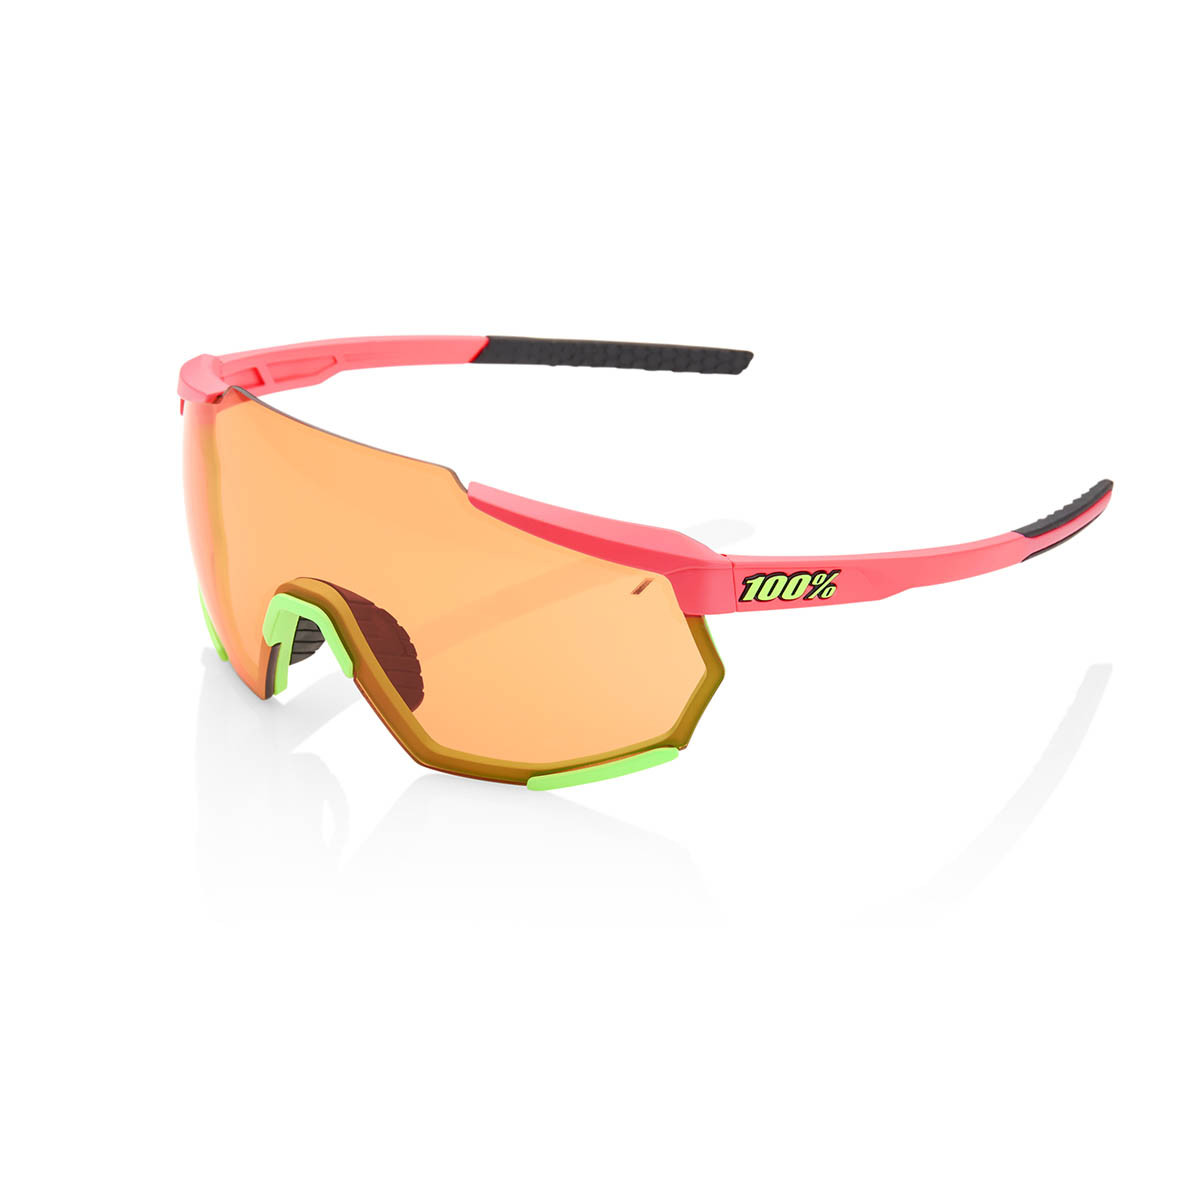 100% Racetrap - Matte Washed Out Neon Pink - Persimmon Lens